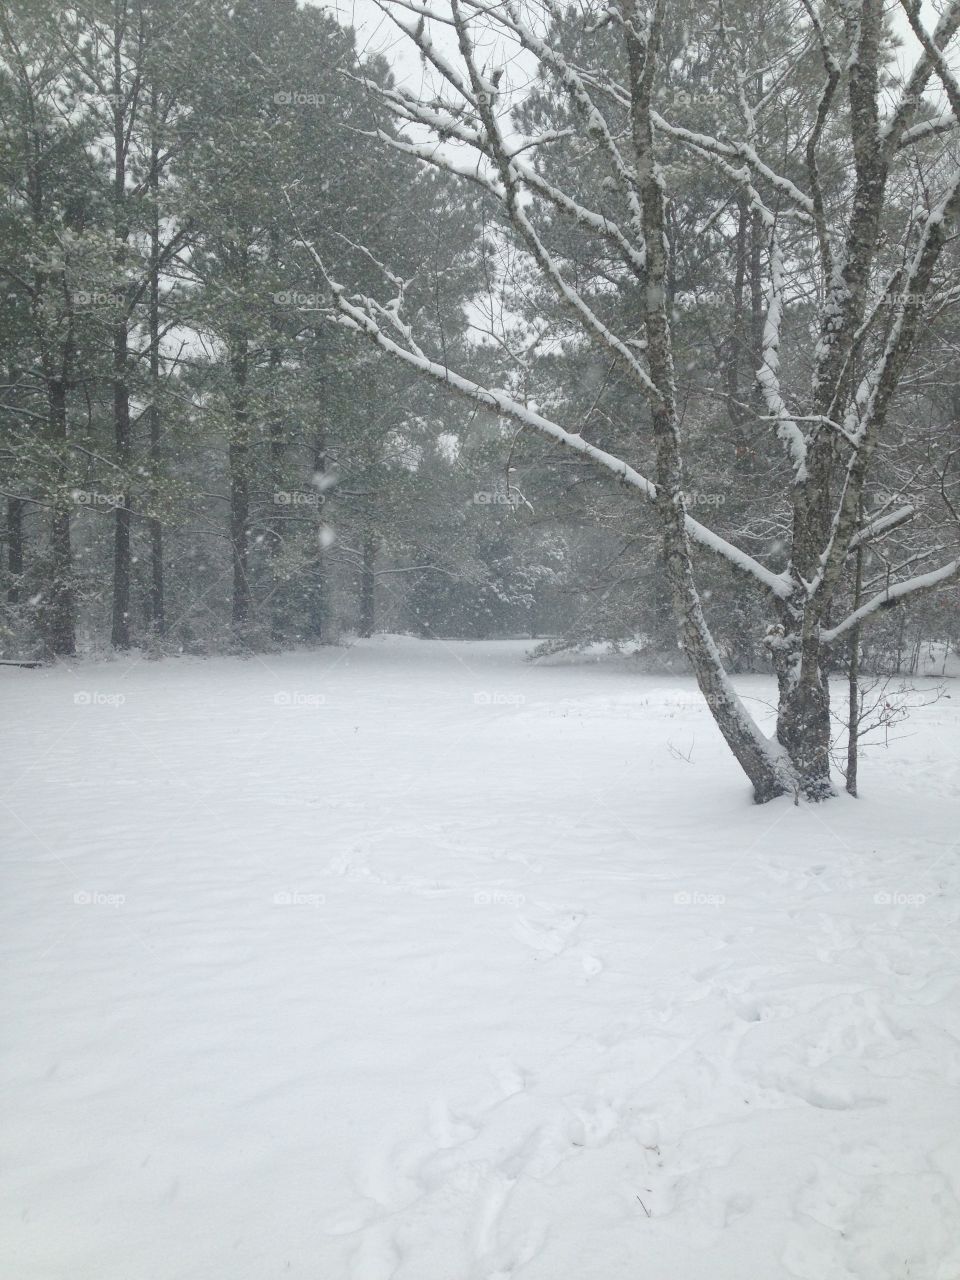 Snow falling in a woody area in NC